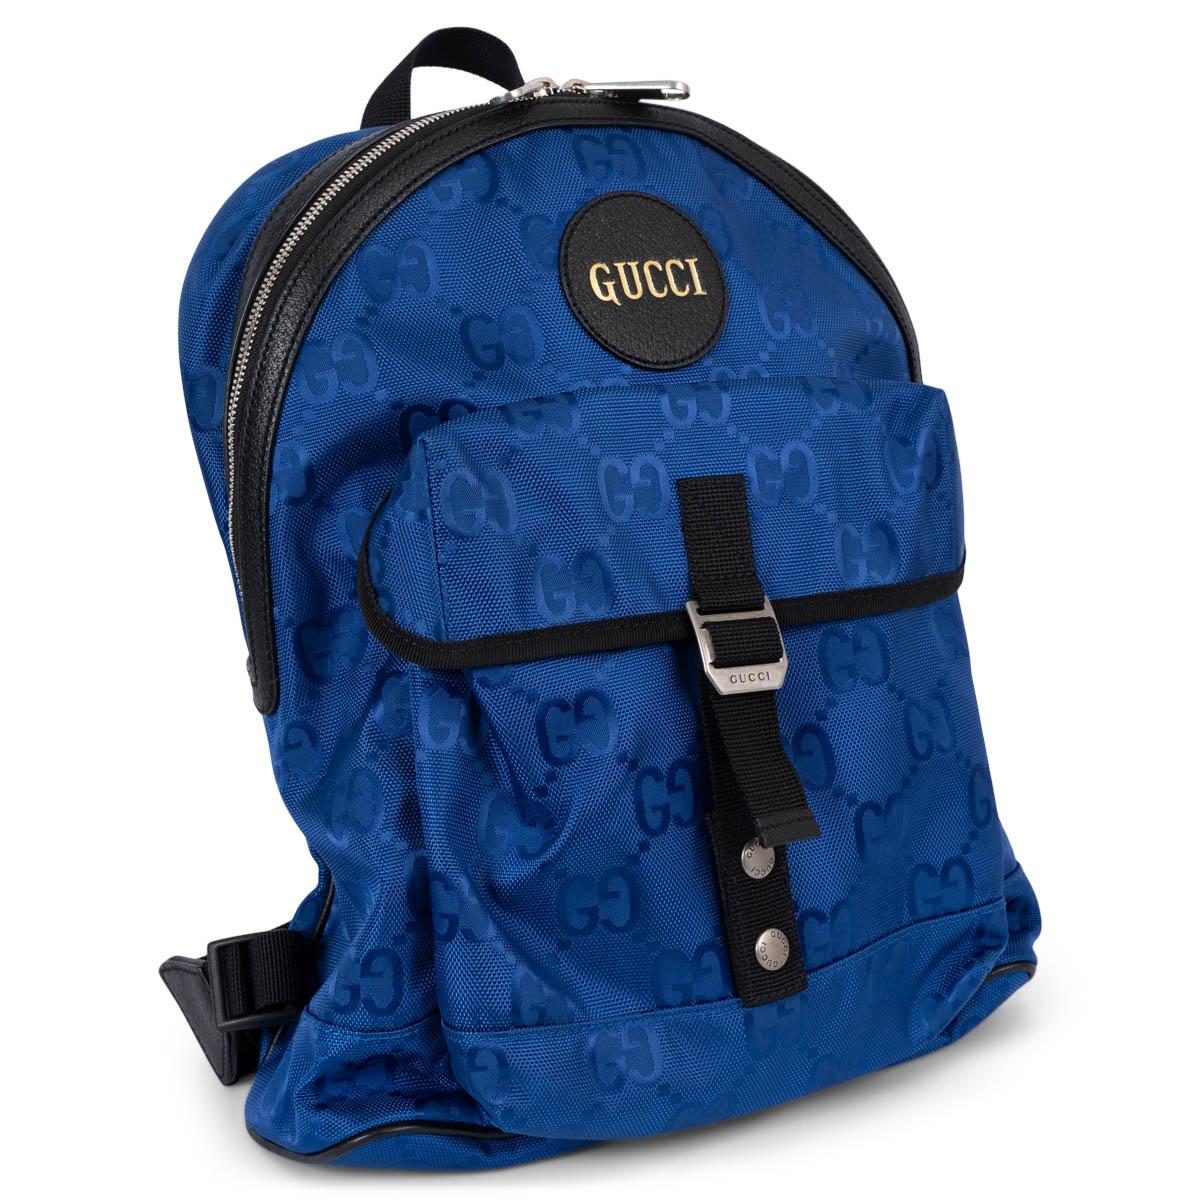 100% authentic Gucci Off the Grid backpack in royal blue ECONYL® canvas with black leather and nylon trim. The design features the classic monogram pattern, silver-tone hardware, logo patch to the front with gold-tone lettering, single top handle,